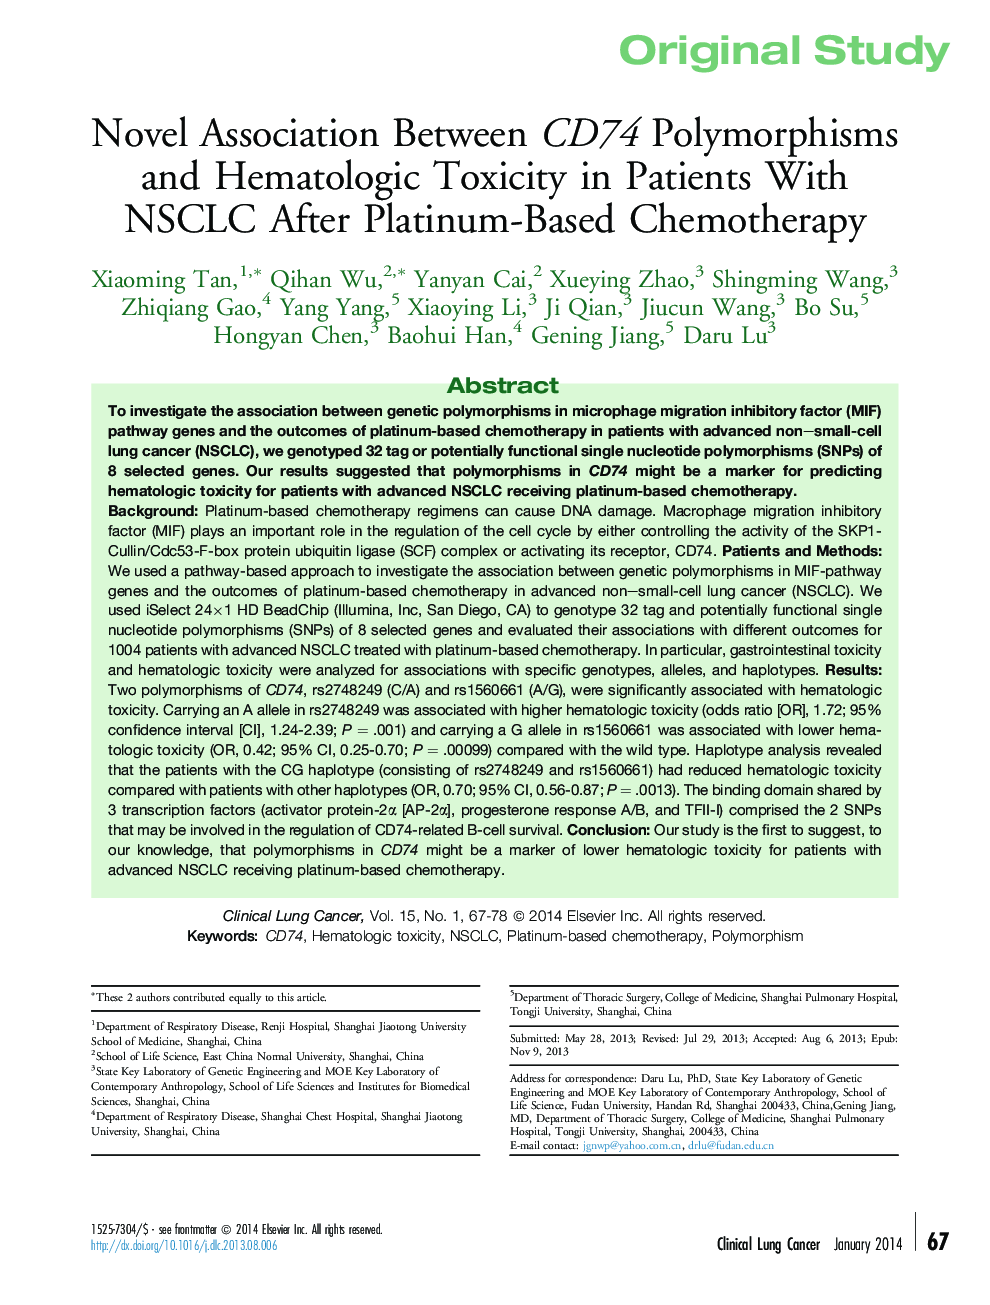 Novel Association Between CD74 Polymorphisms and Hematologic Toxicity in Patients With NSCLC After Platinum-Based Chemotherapy